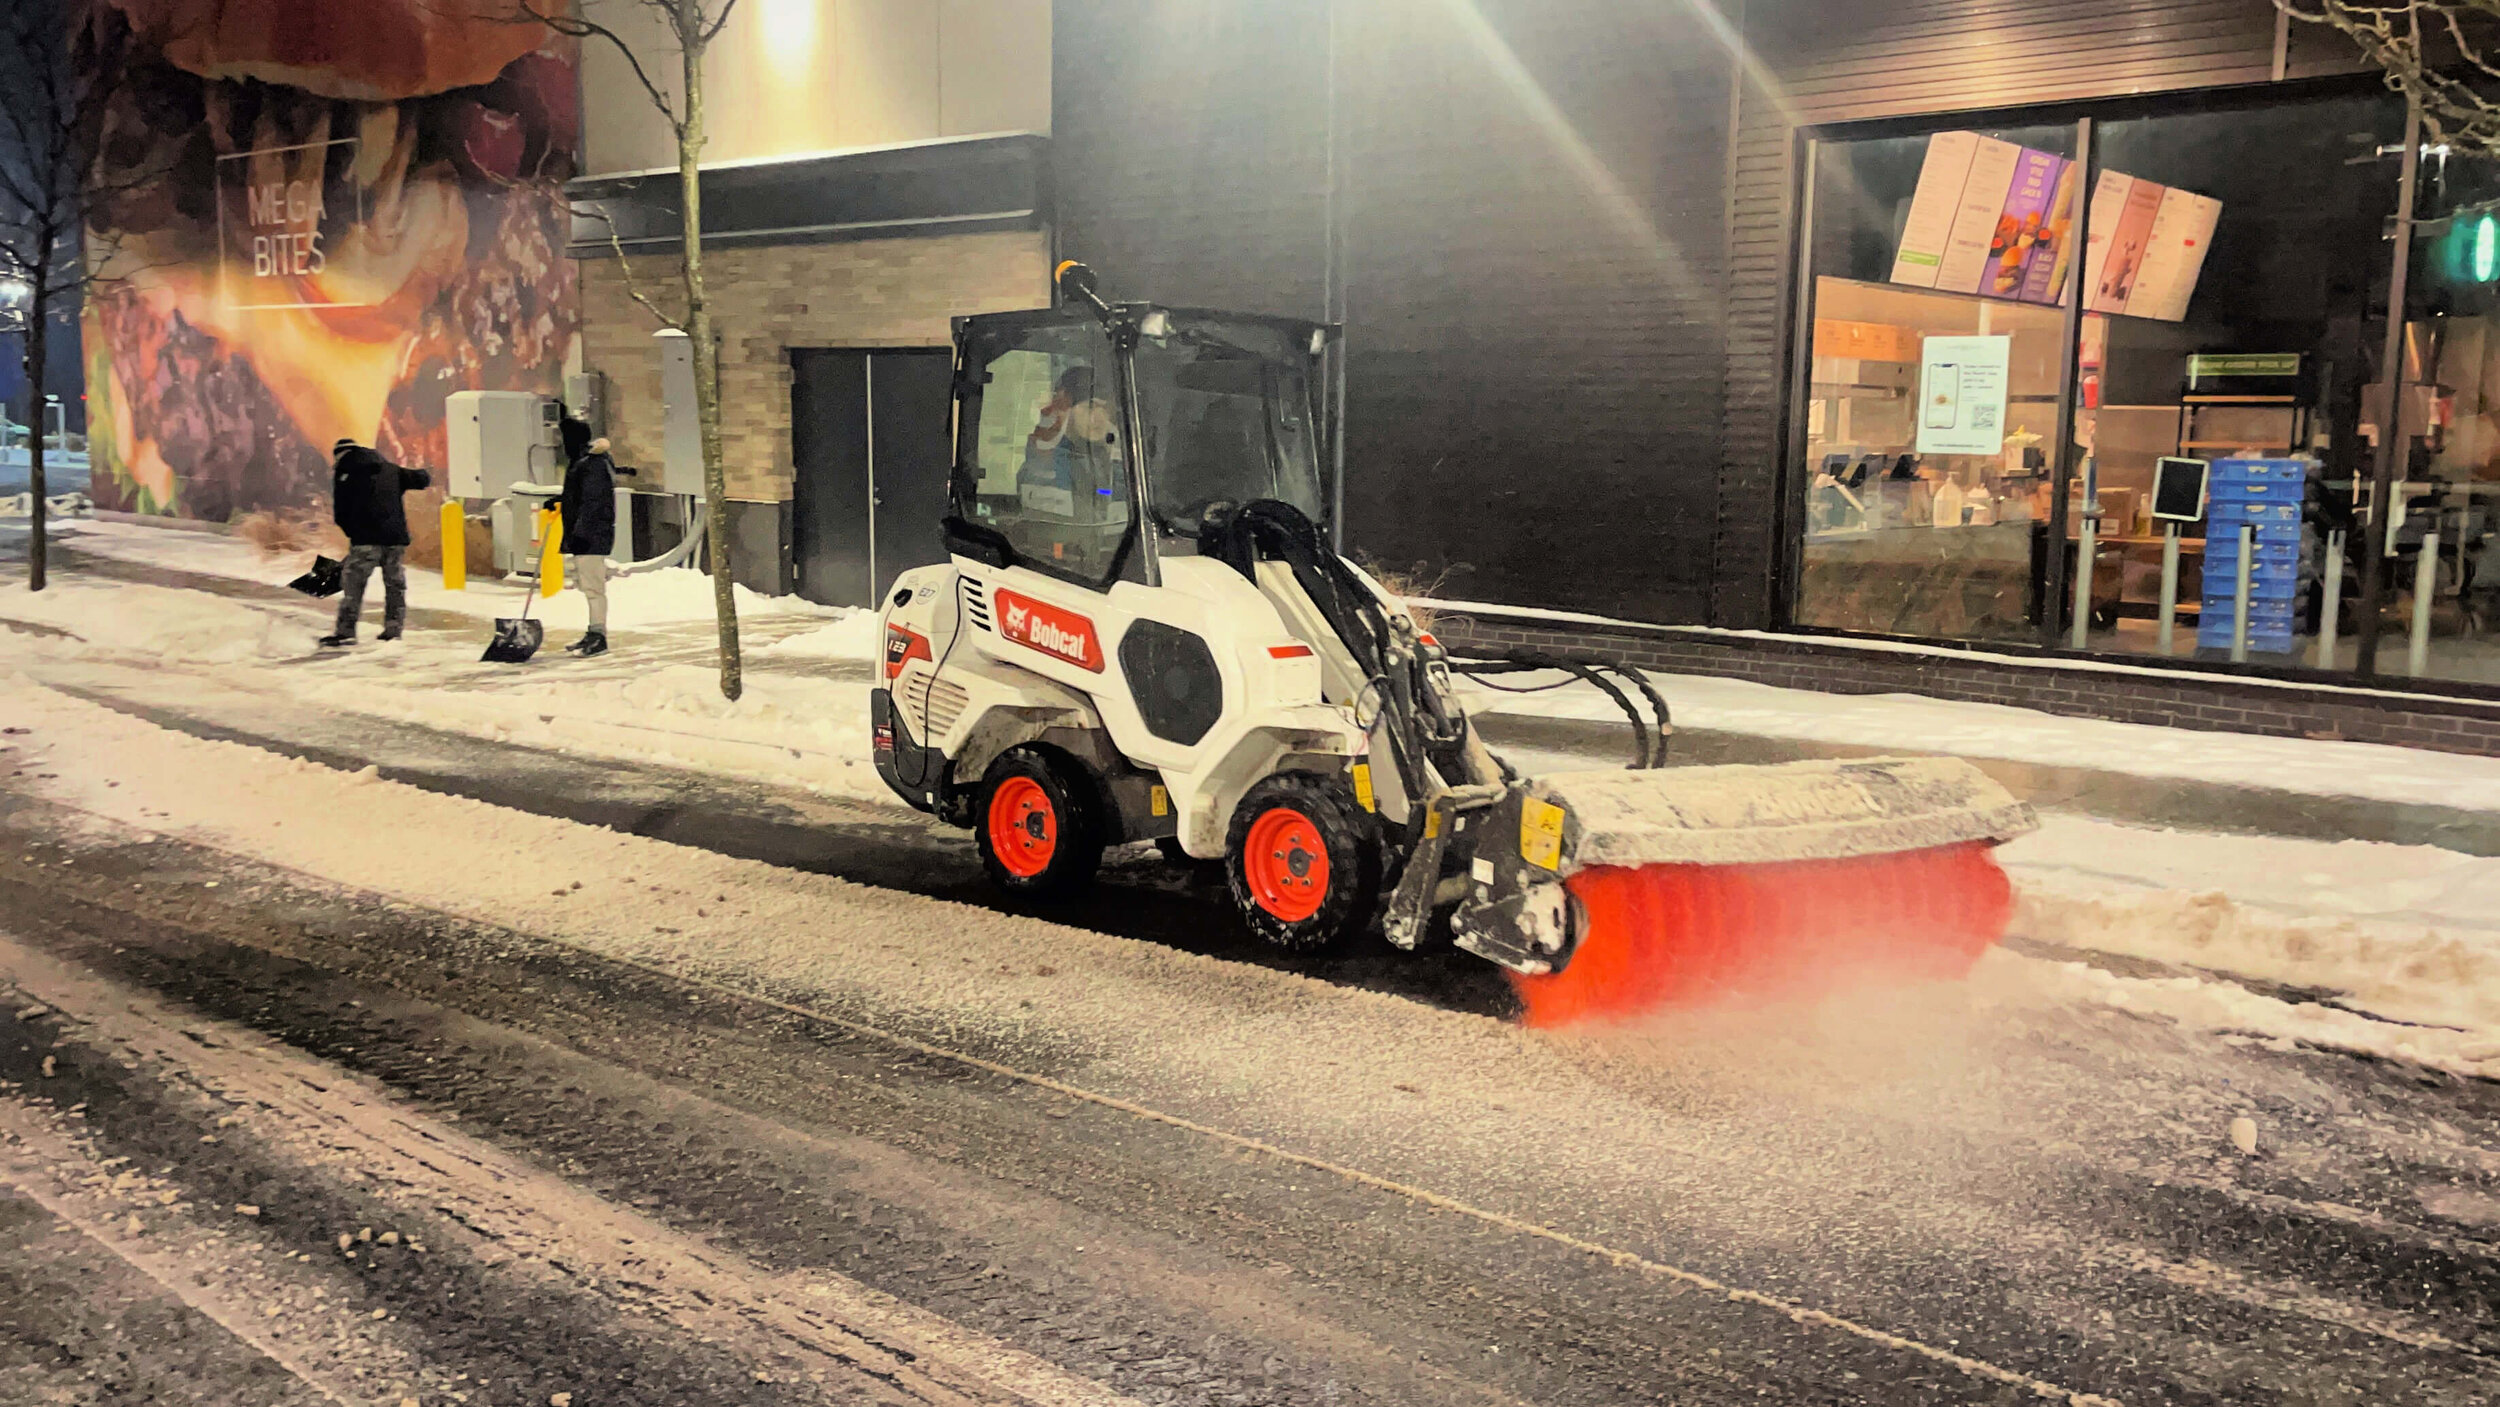 Snow Removal Equipment at